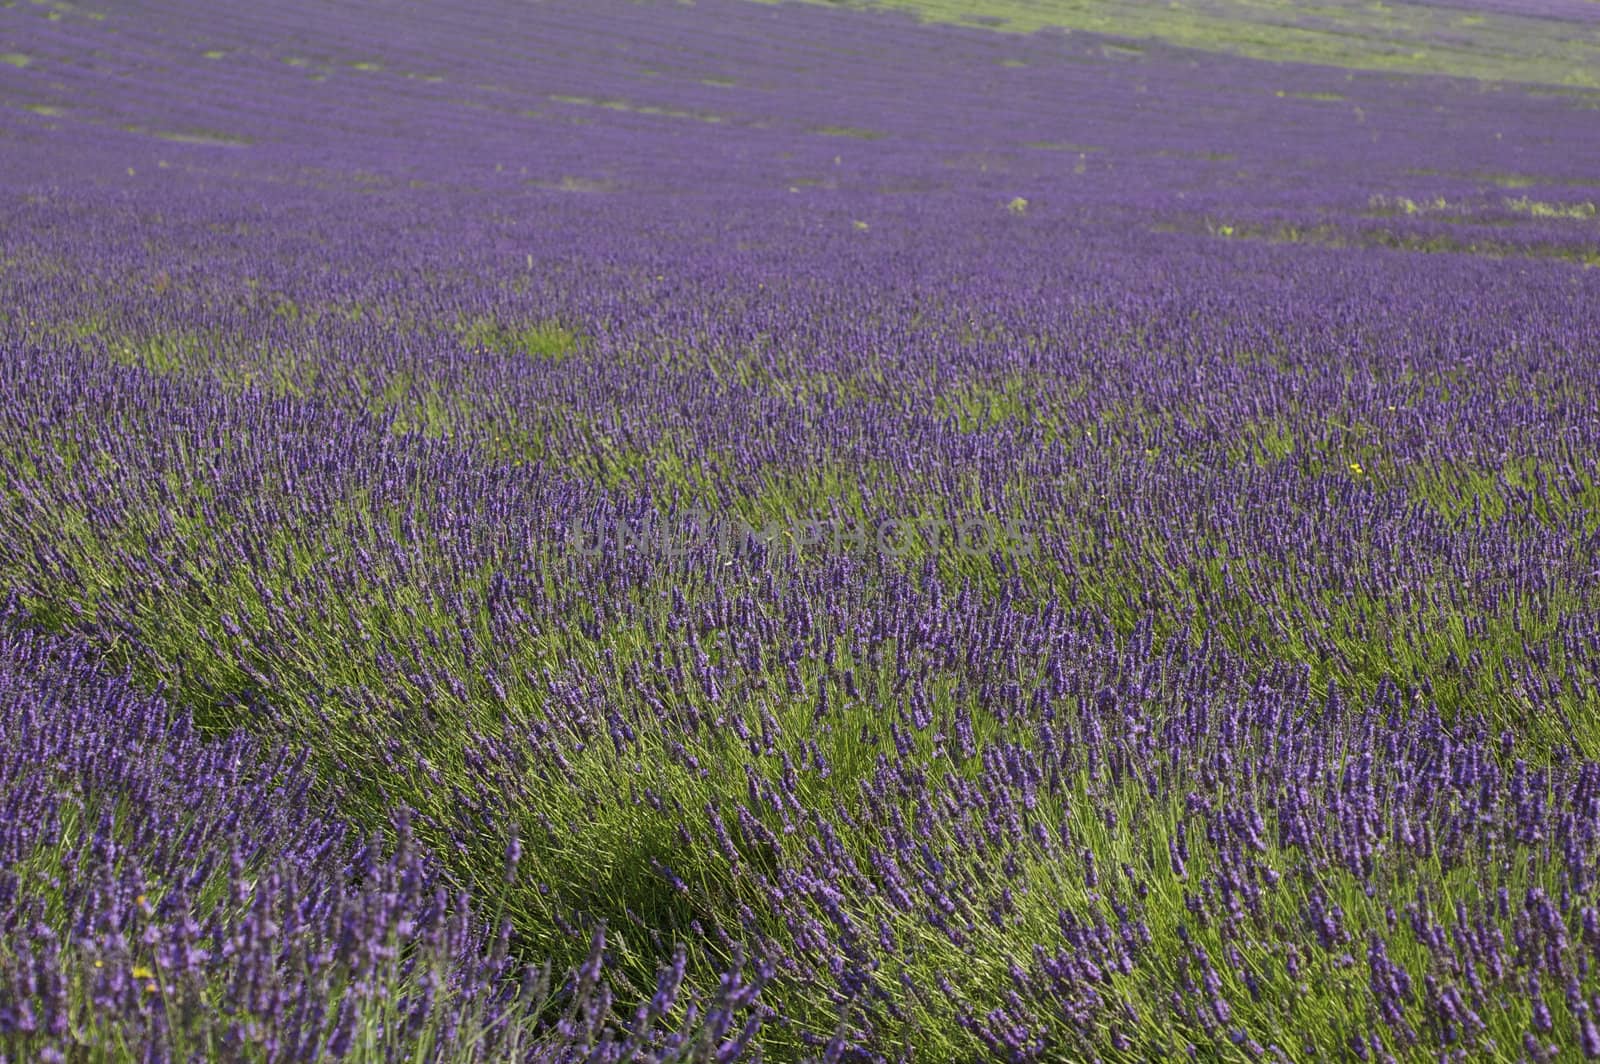 Rows of purple blossoming lavender with green stalks leading up a hill.